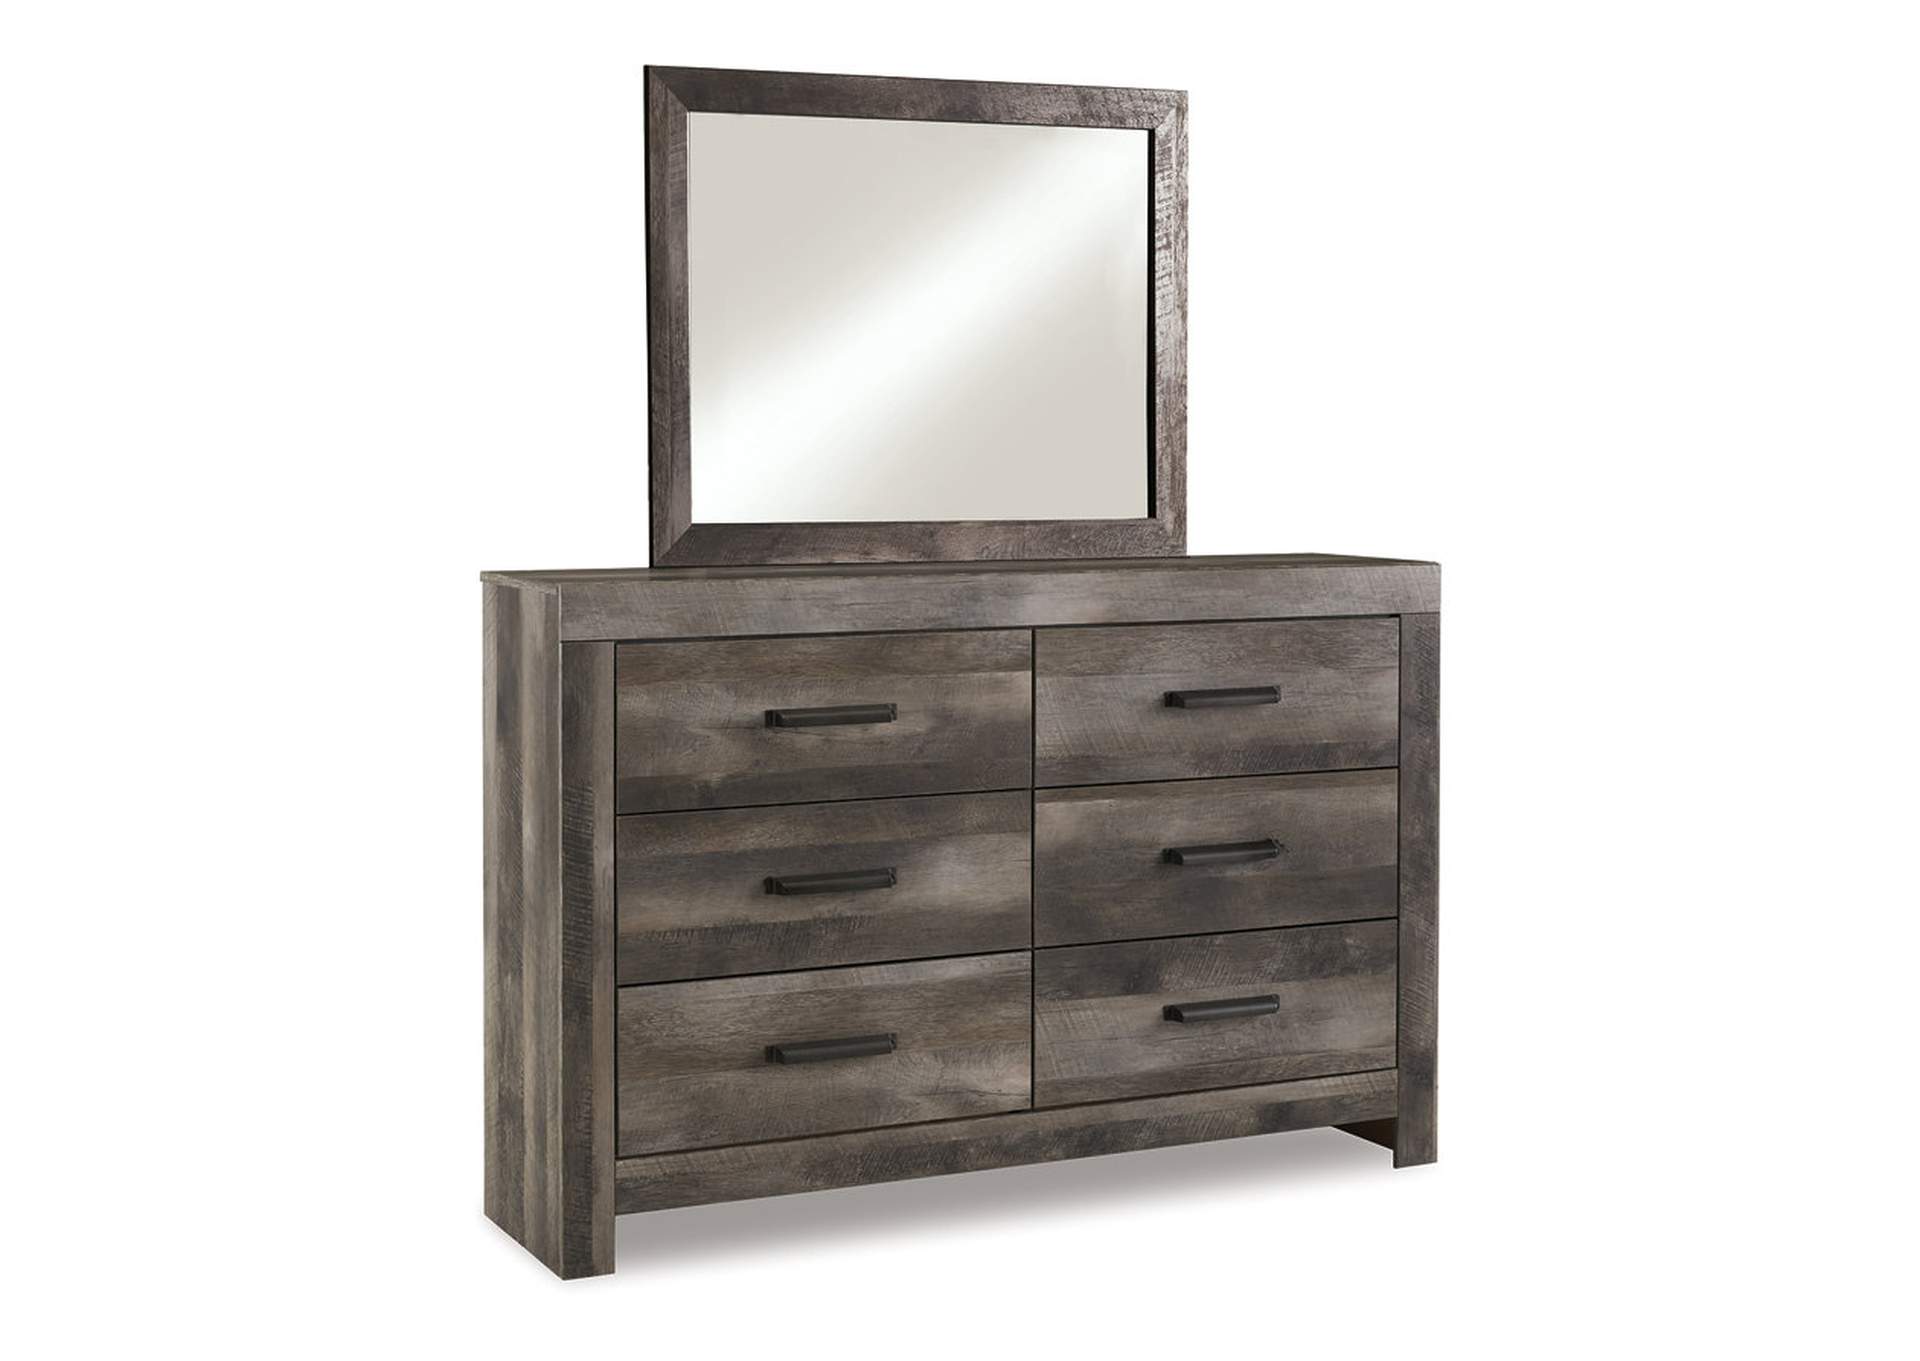 Wynnlow King Panel Bed with Mirrored Dresser, Chest and 2 Nightstands,Signature Design By Ashley